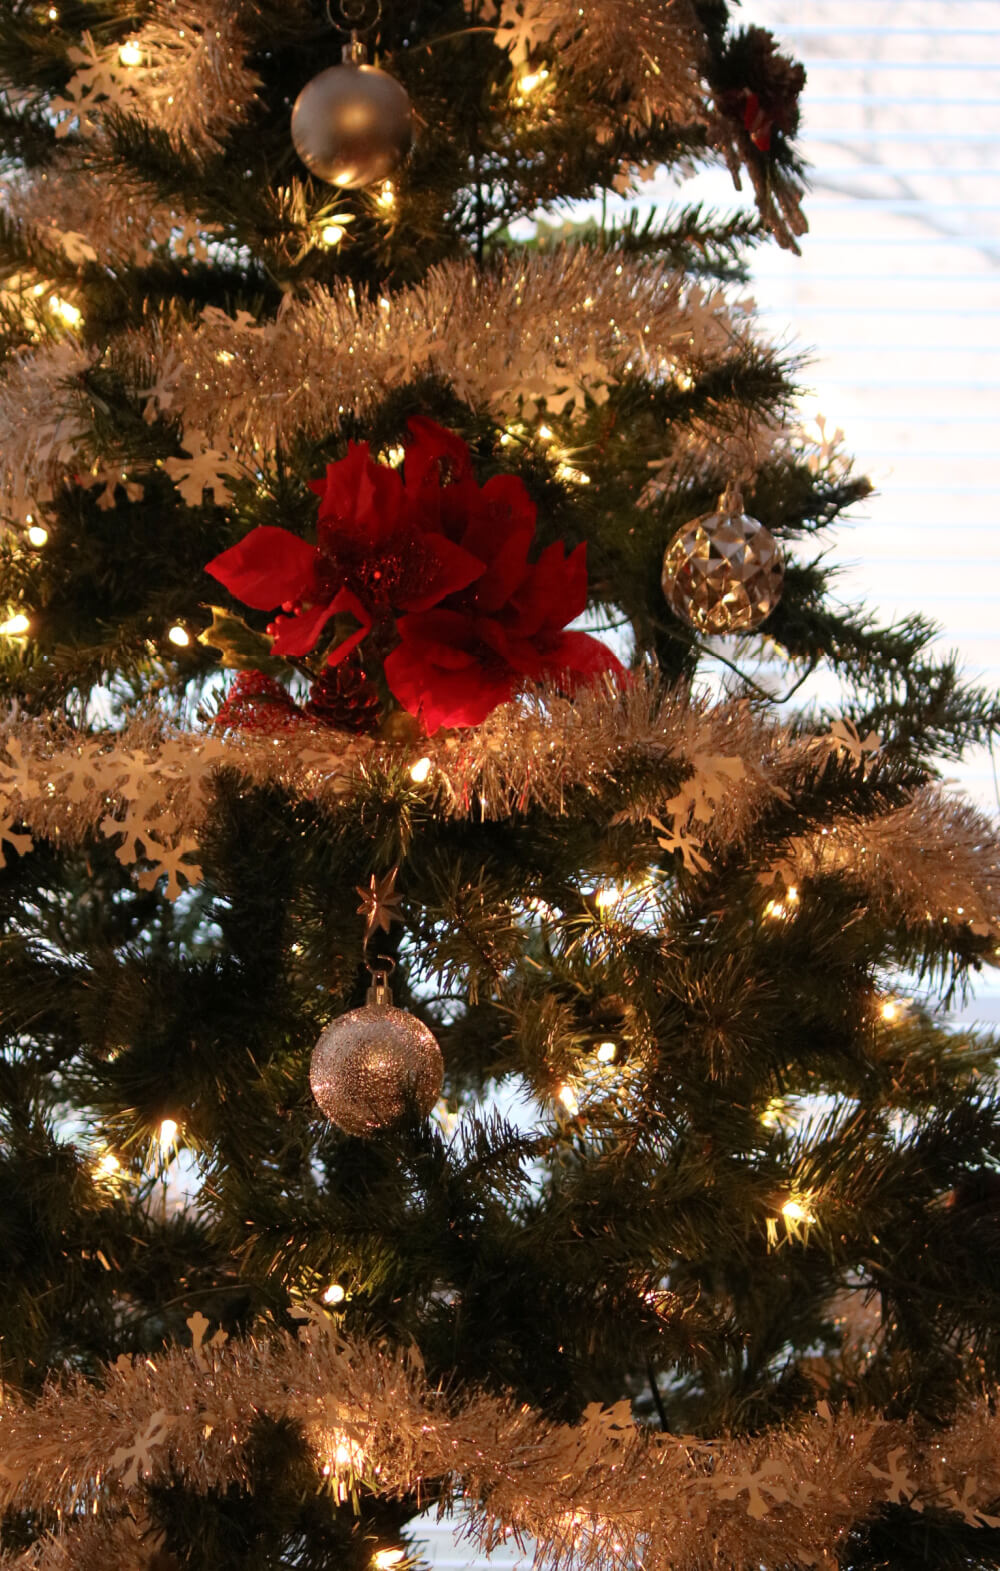 In The Neighbors' Christmas Trees, a close up of John's tree.